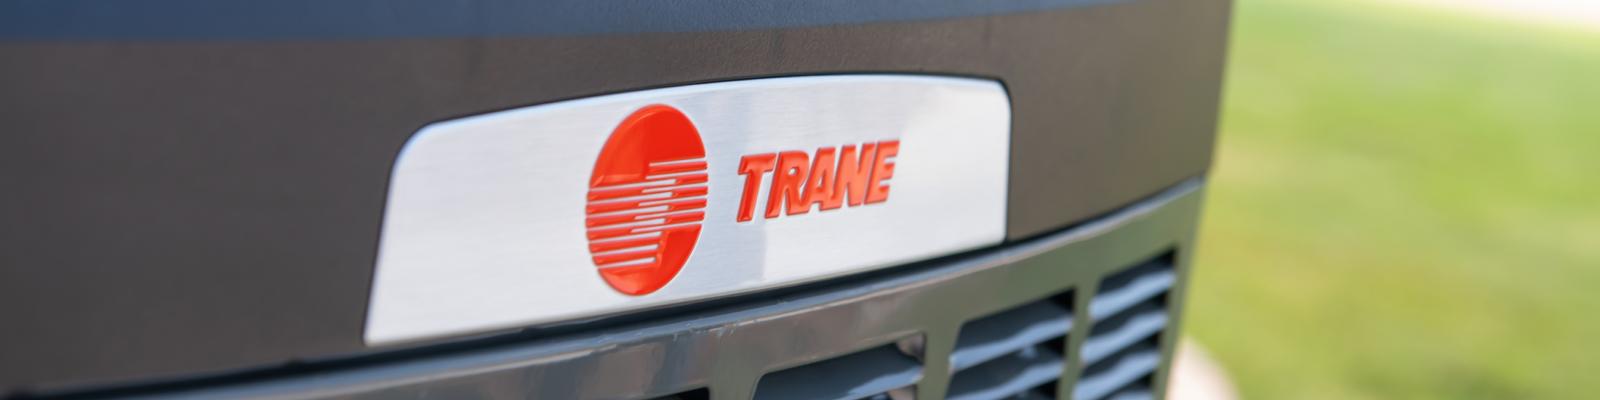 Close up shot of the Trane logo on an outdoor HVAC unit.